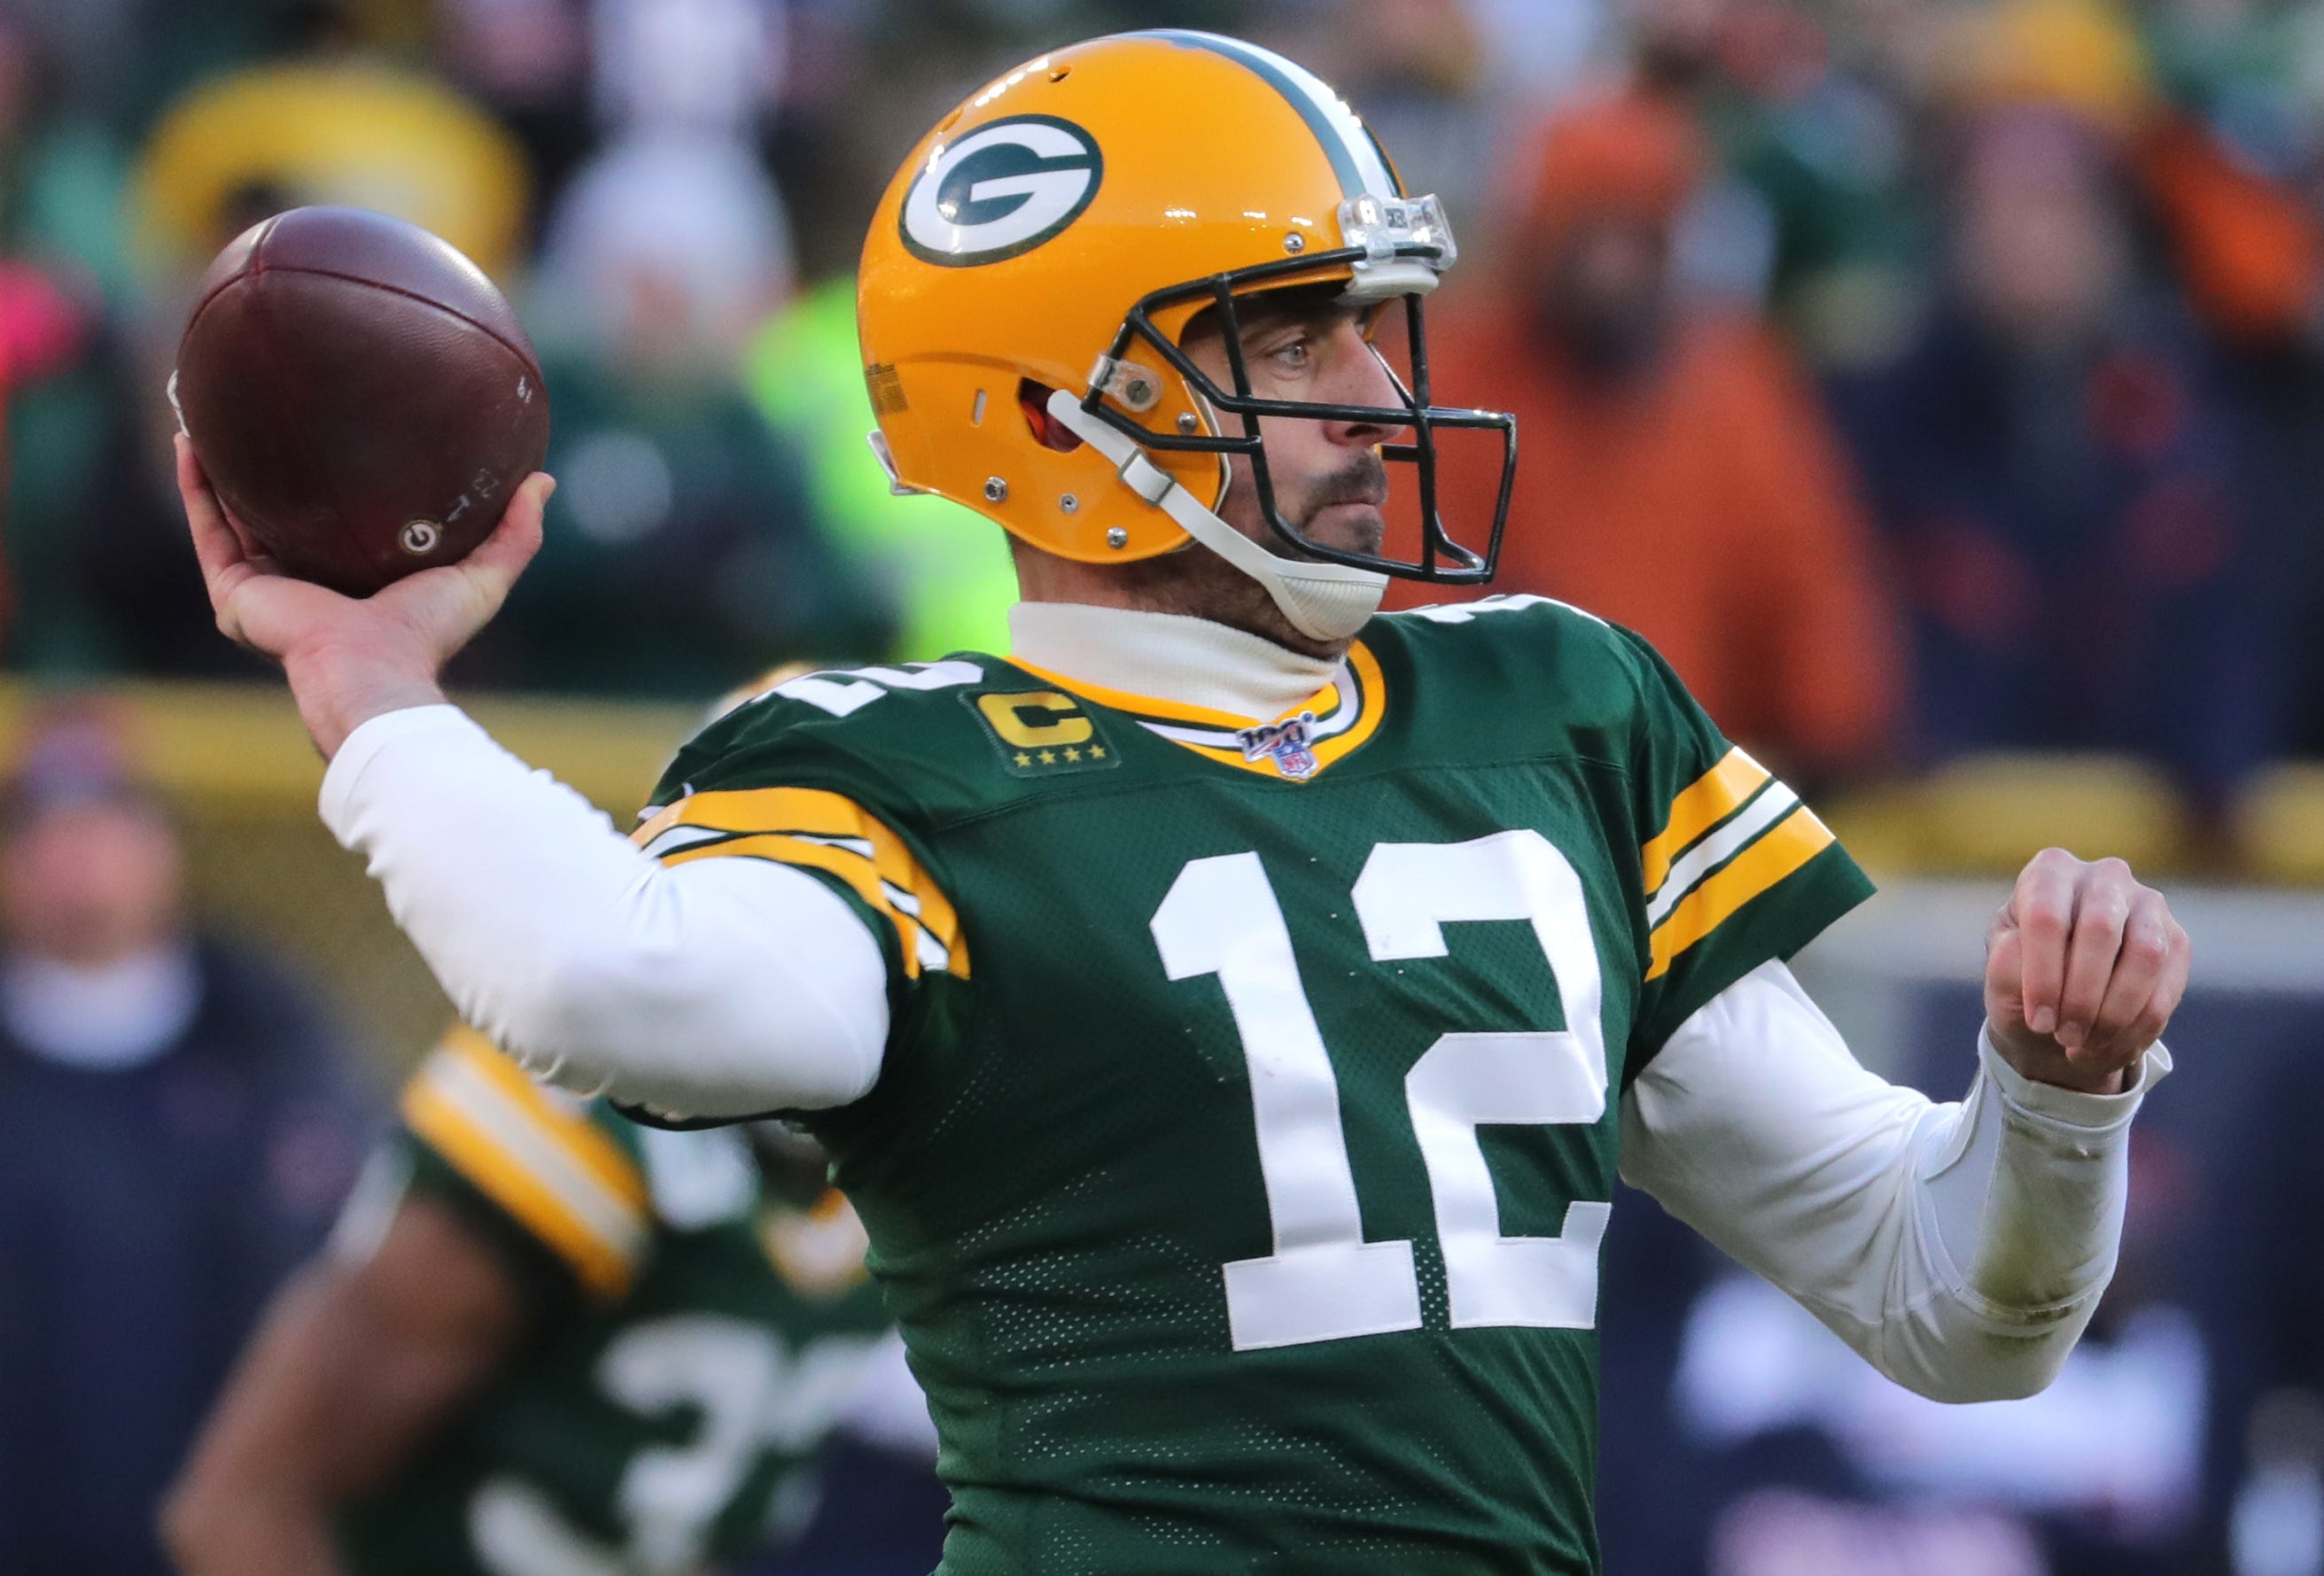 Green Bay Packers quarterback Aaron Rodgers (12) throw a pass during the third quarter of their game Sunday, December 15, 2019 at Lambeau Field in Green Bay, Wis. The Green Bay Packers beat the Chicago Bears 21-13.